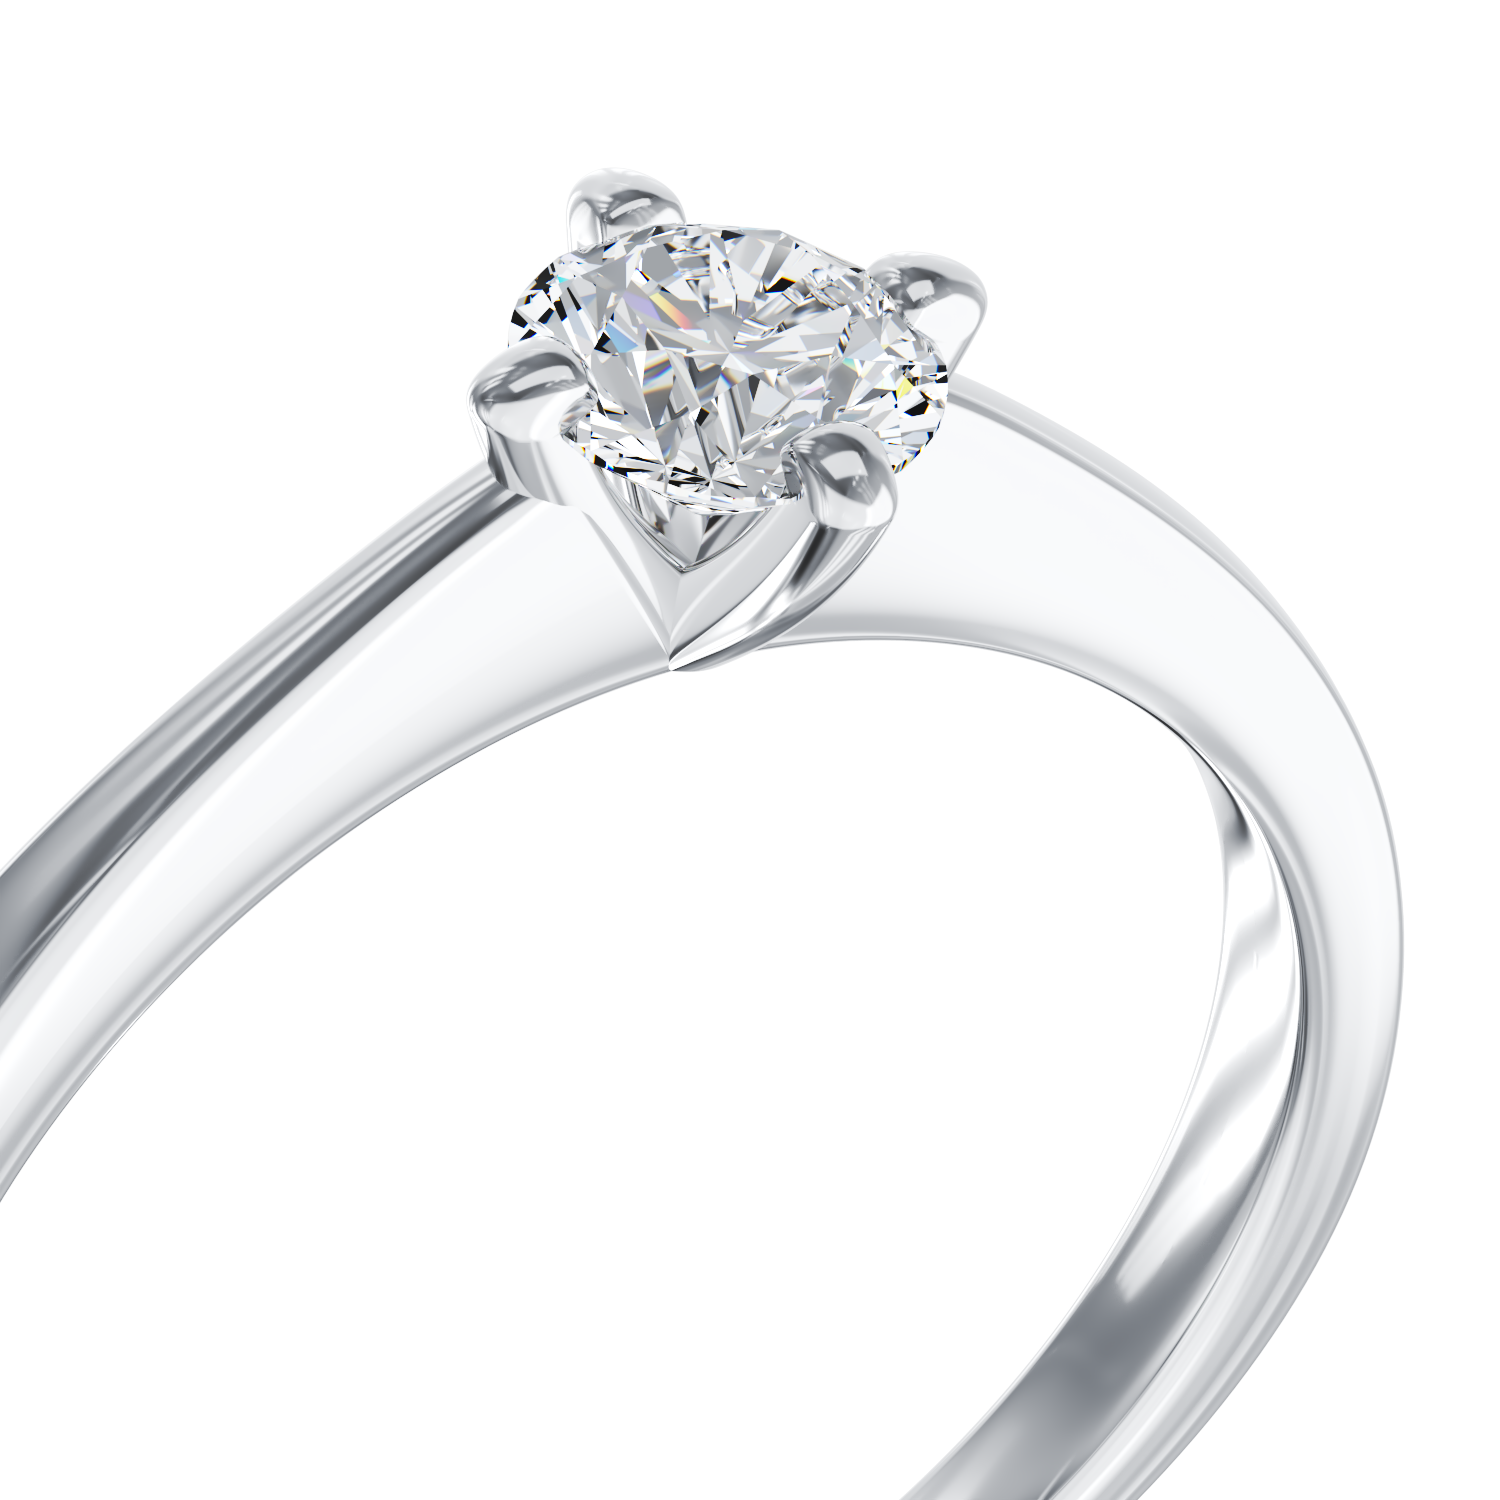 18K white gold engagement ring with 0.31ct diamond